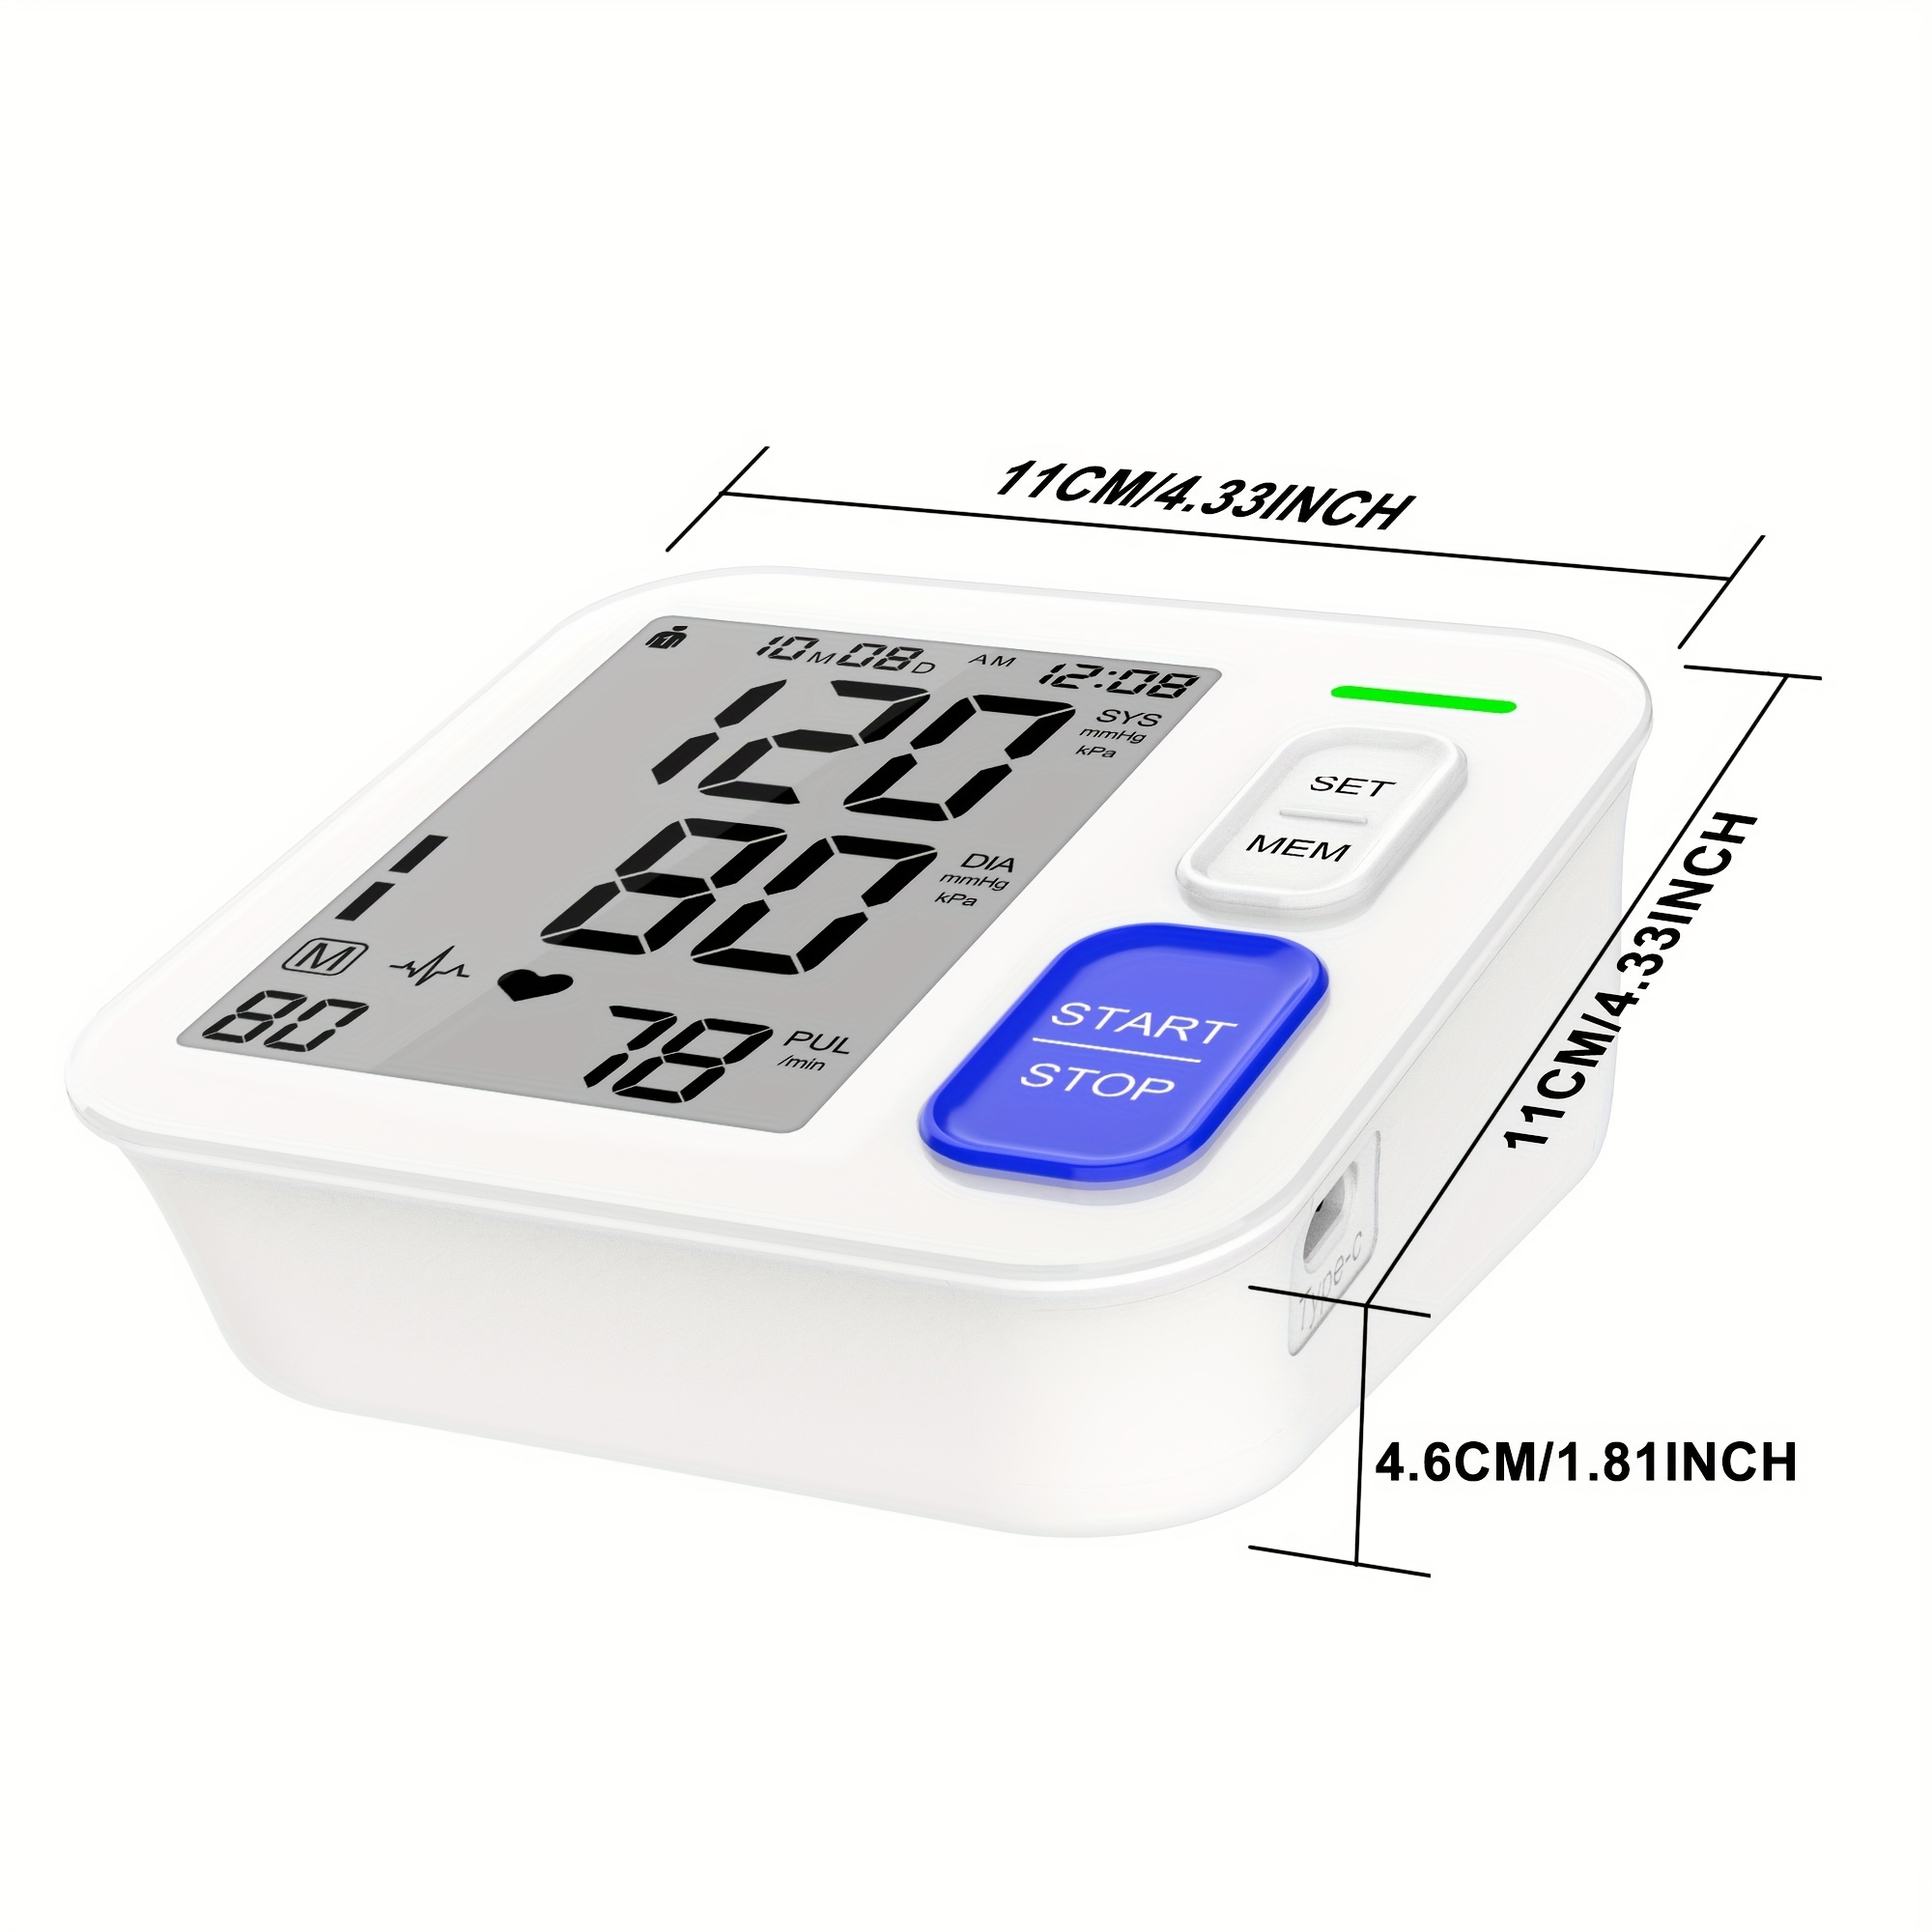 Accurate Blood Pressure Monitors For Home Use, Adjustable Large